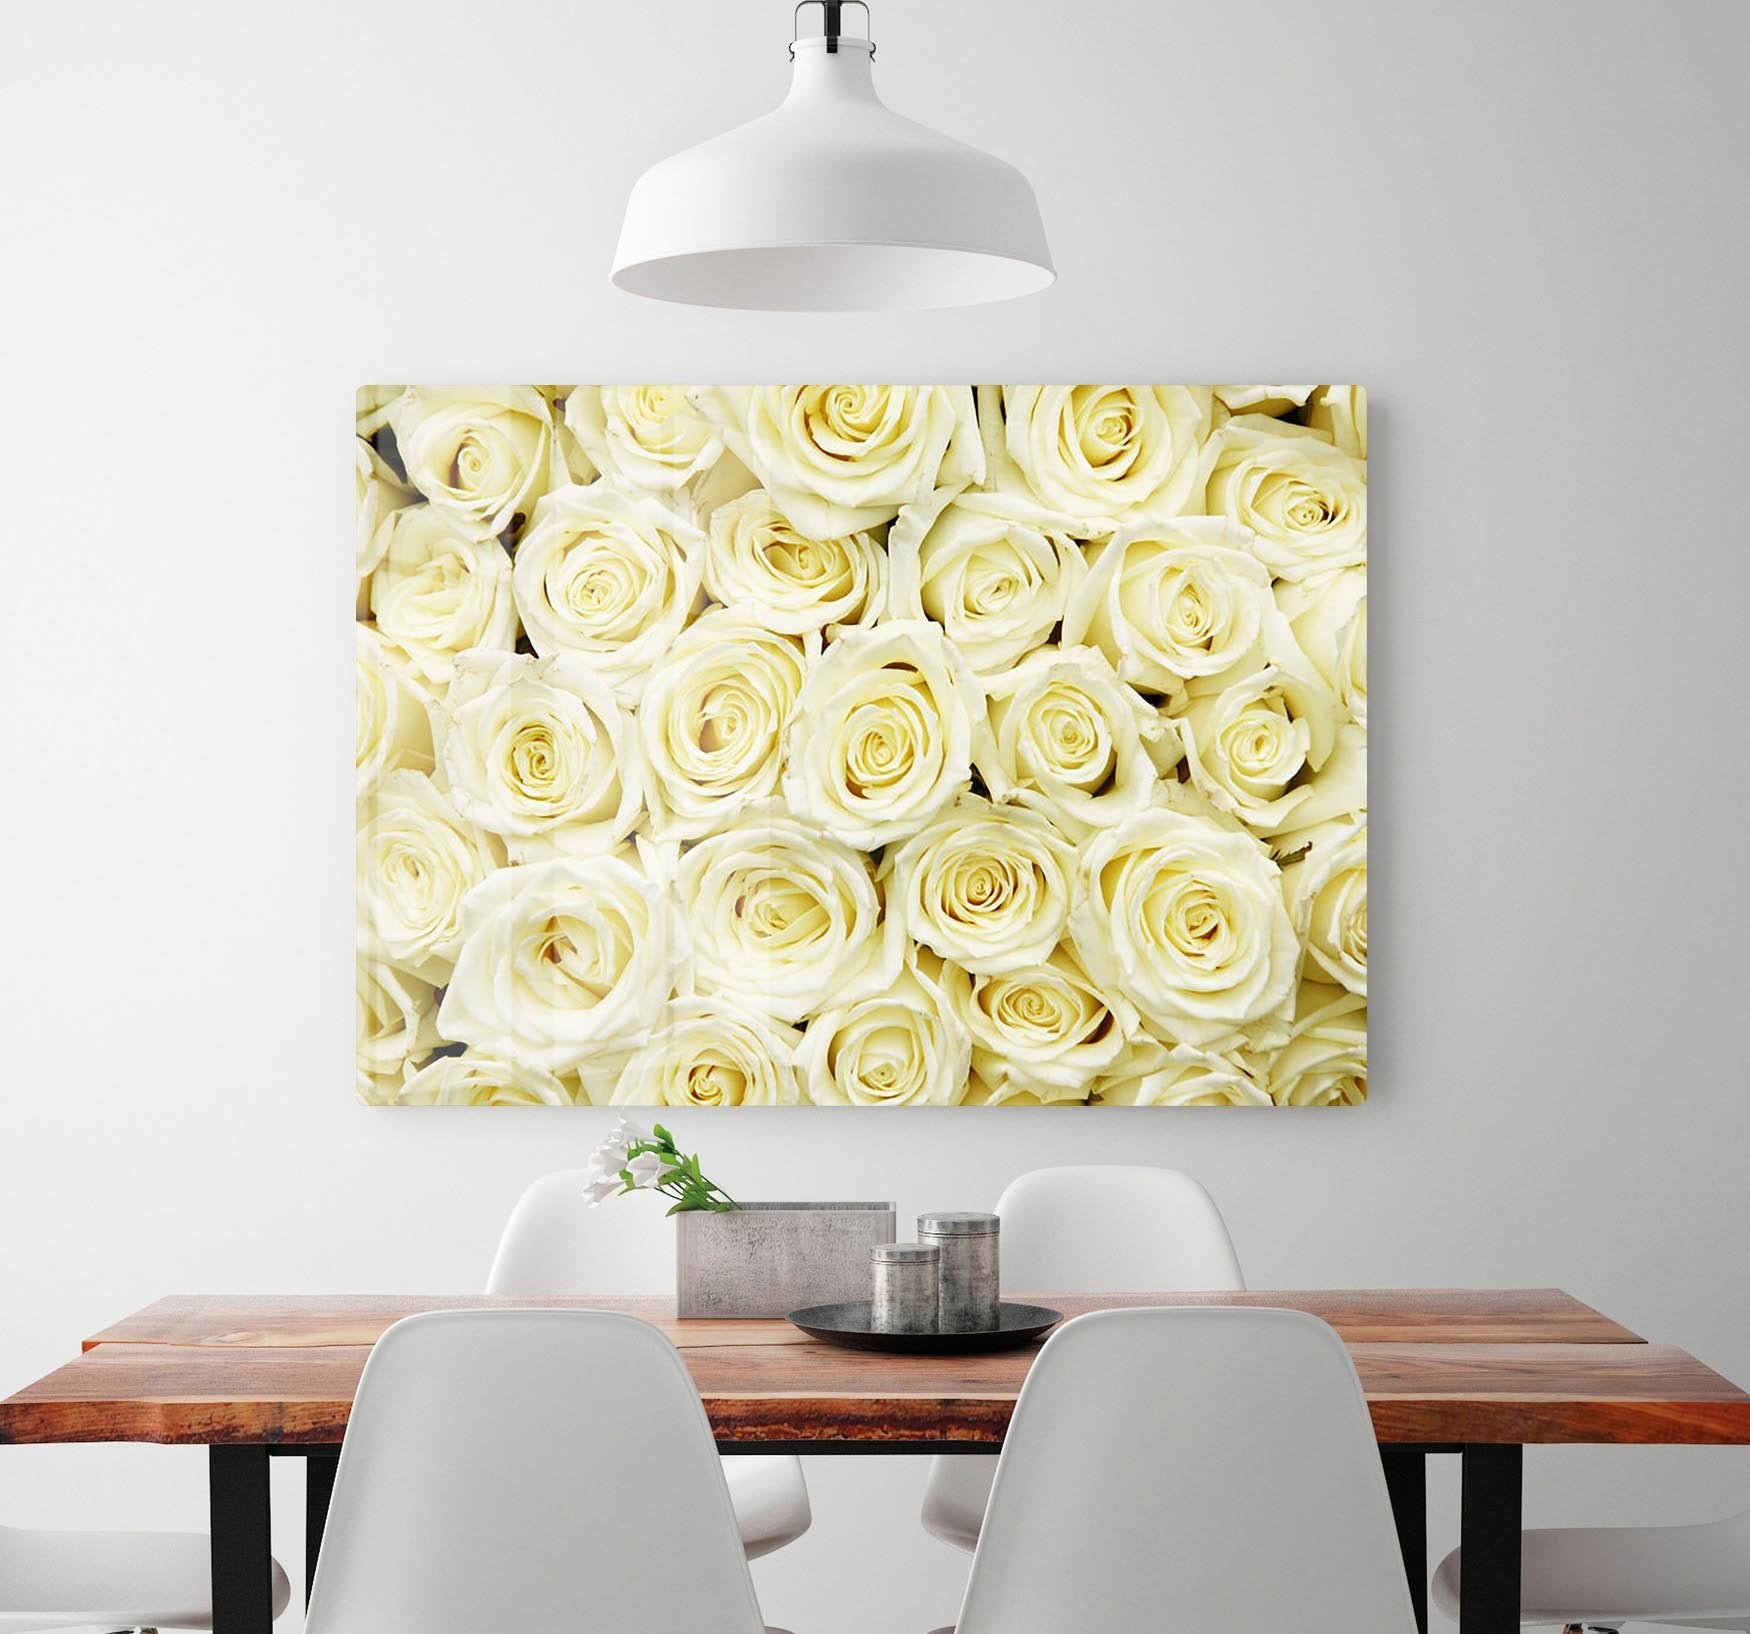 Huge bouquet of white roses HD Metal Print